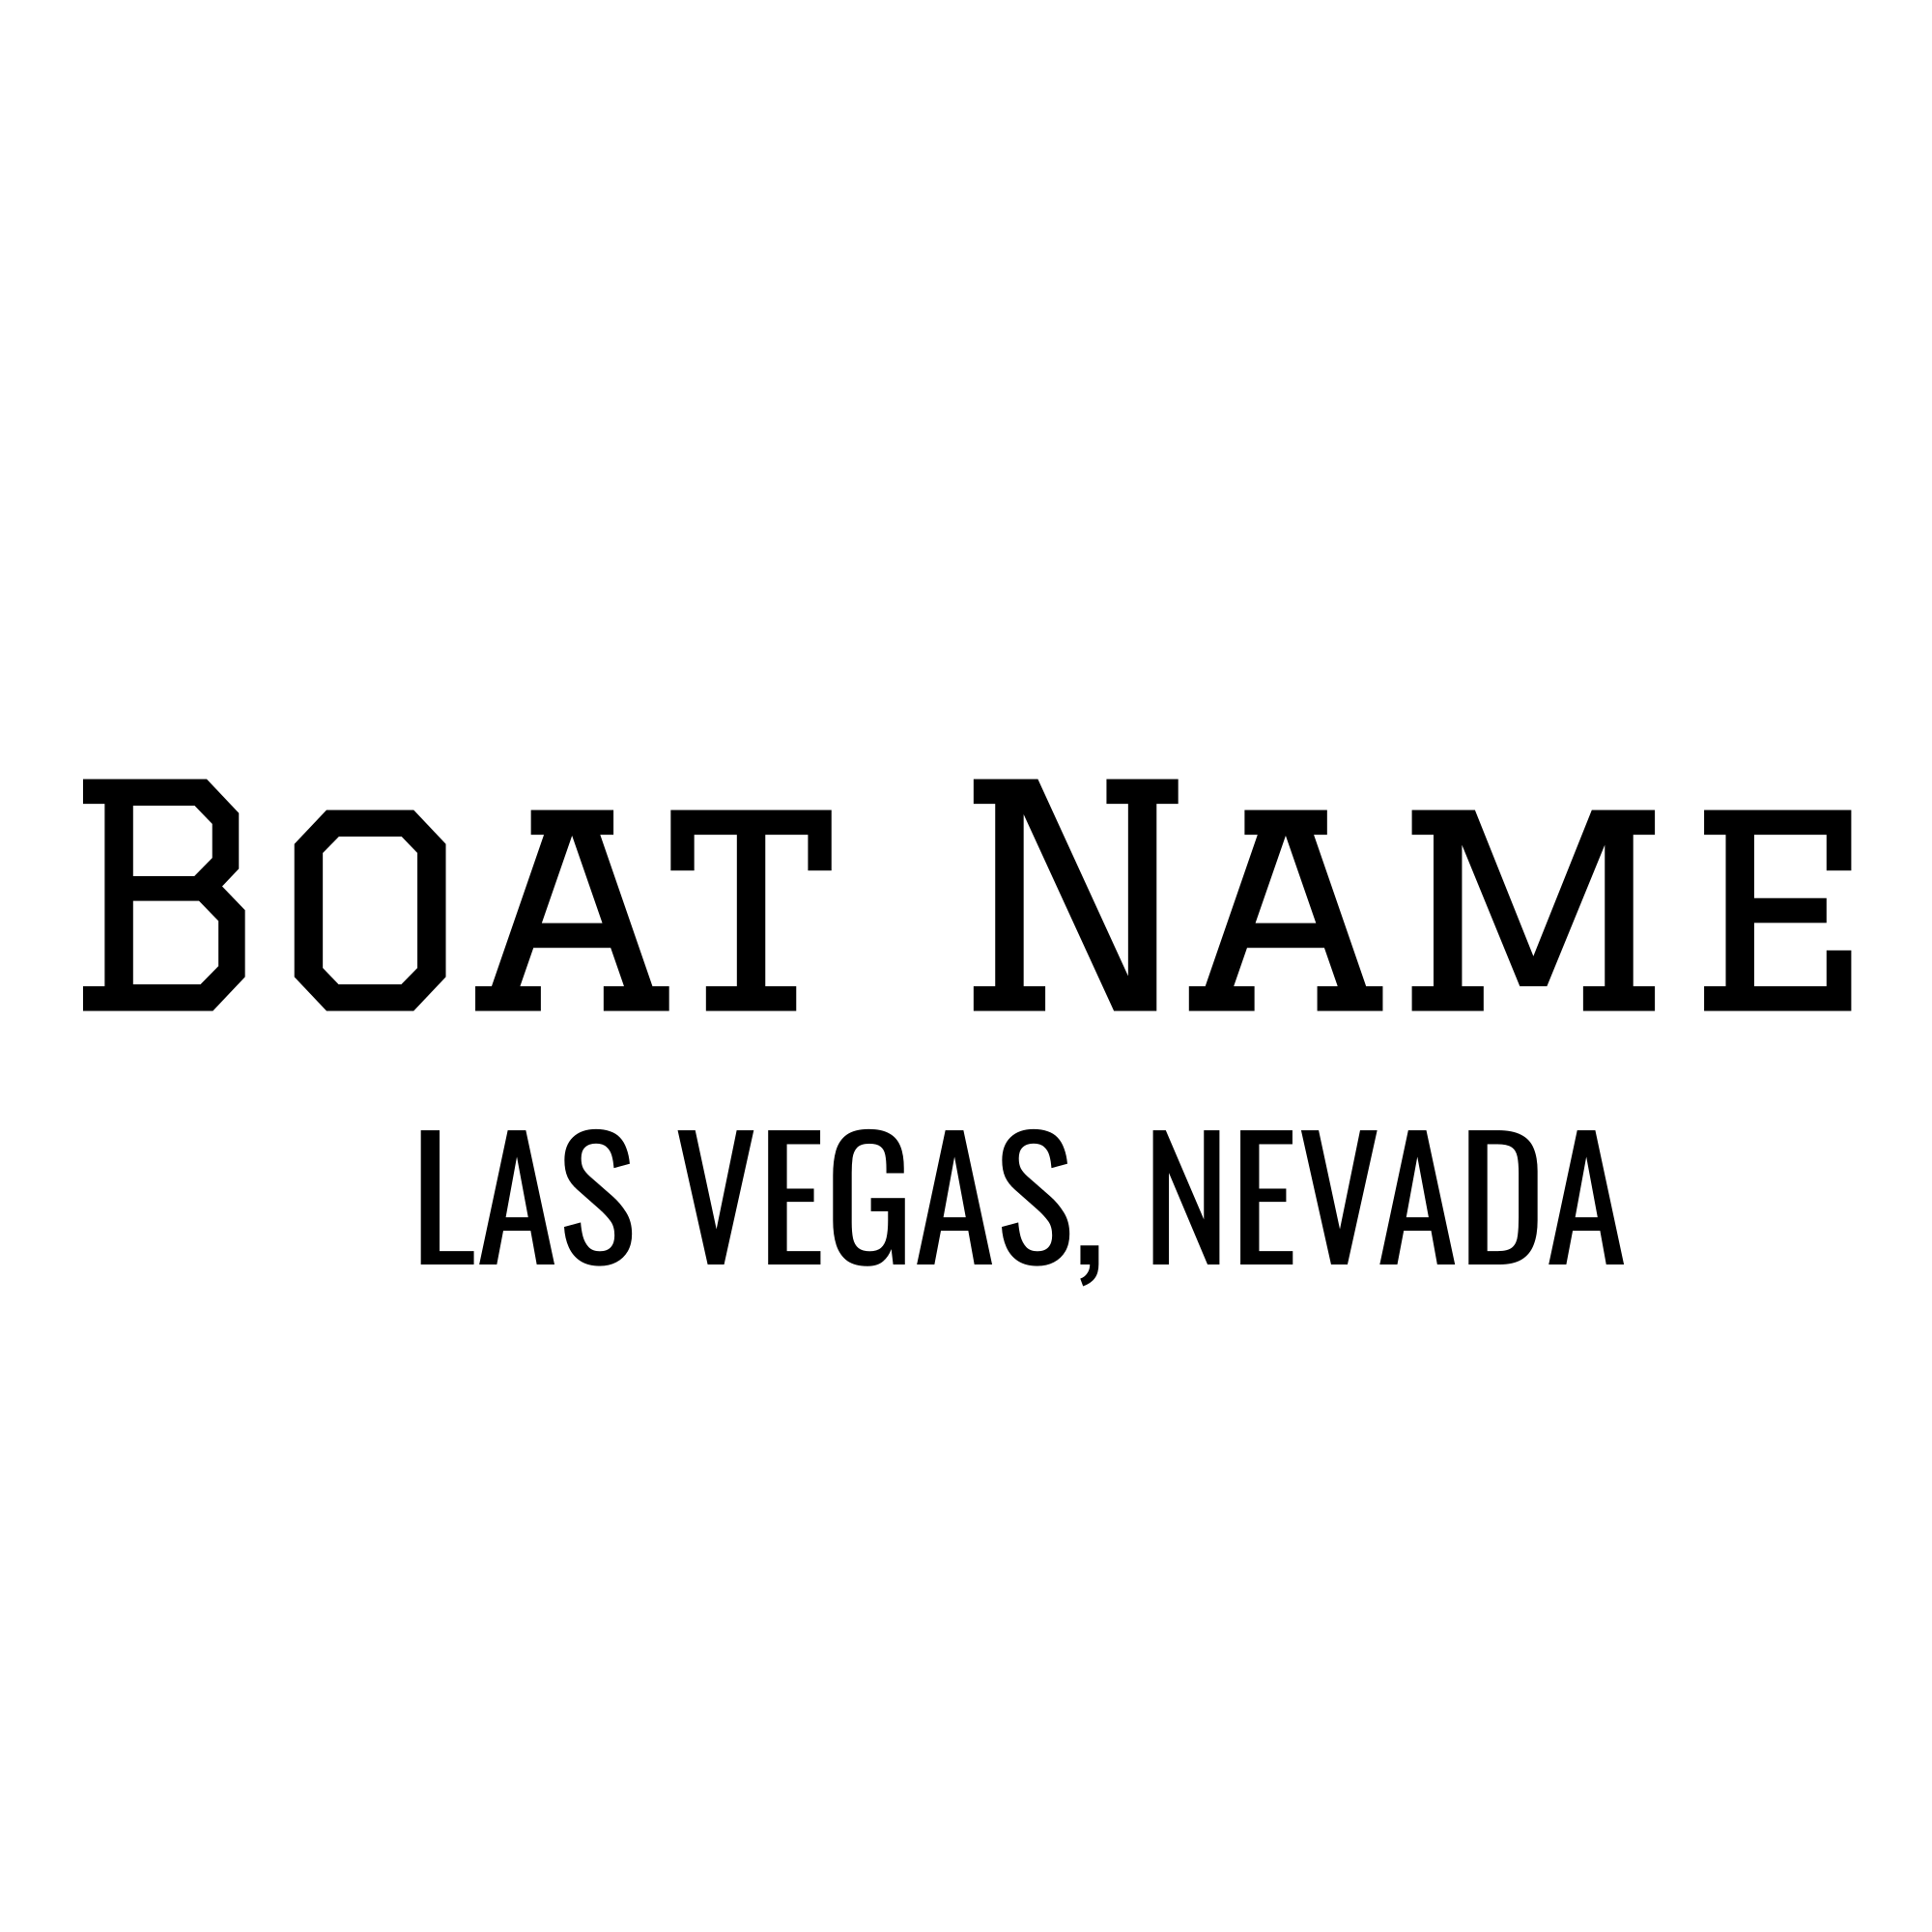 Personalized Boat Name Vinyl Decal with Hailing Port State - Permanent Marine-Grade for Signs, Speed boat, Fishing Vessel, Watercraft B10